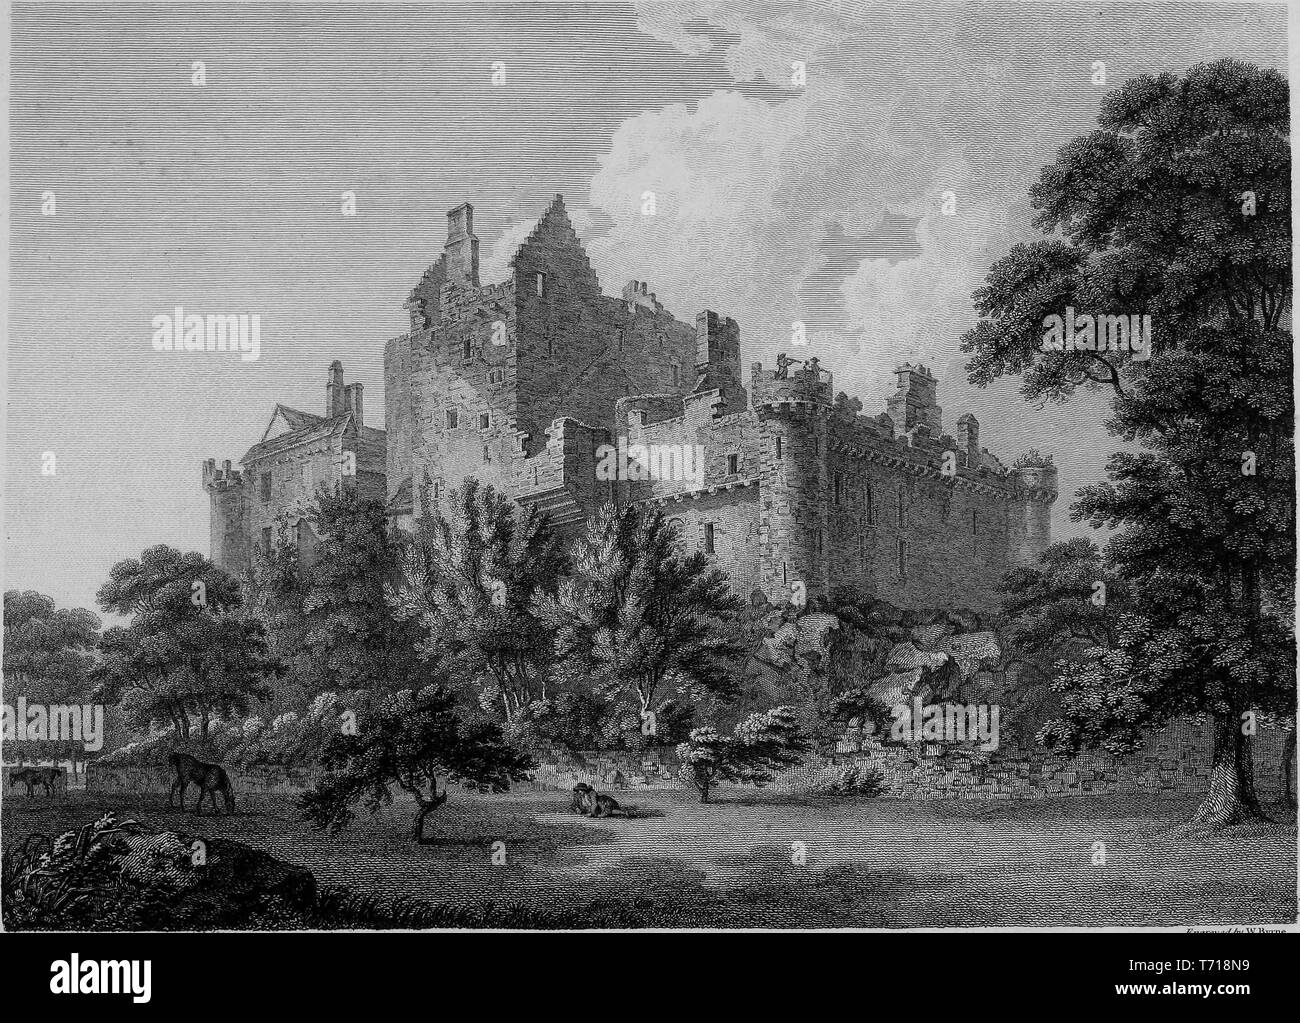 Engraving of the Craigmillar Castle in Edinburgh, Scotland, from the book 'Antiquities of Great Britain' by William Byrne and Thomas Hearne, 1825. Courtesy Internet Archive. () Stock Photo